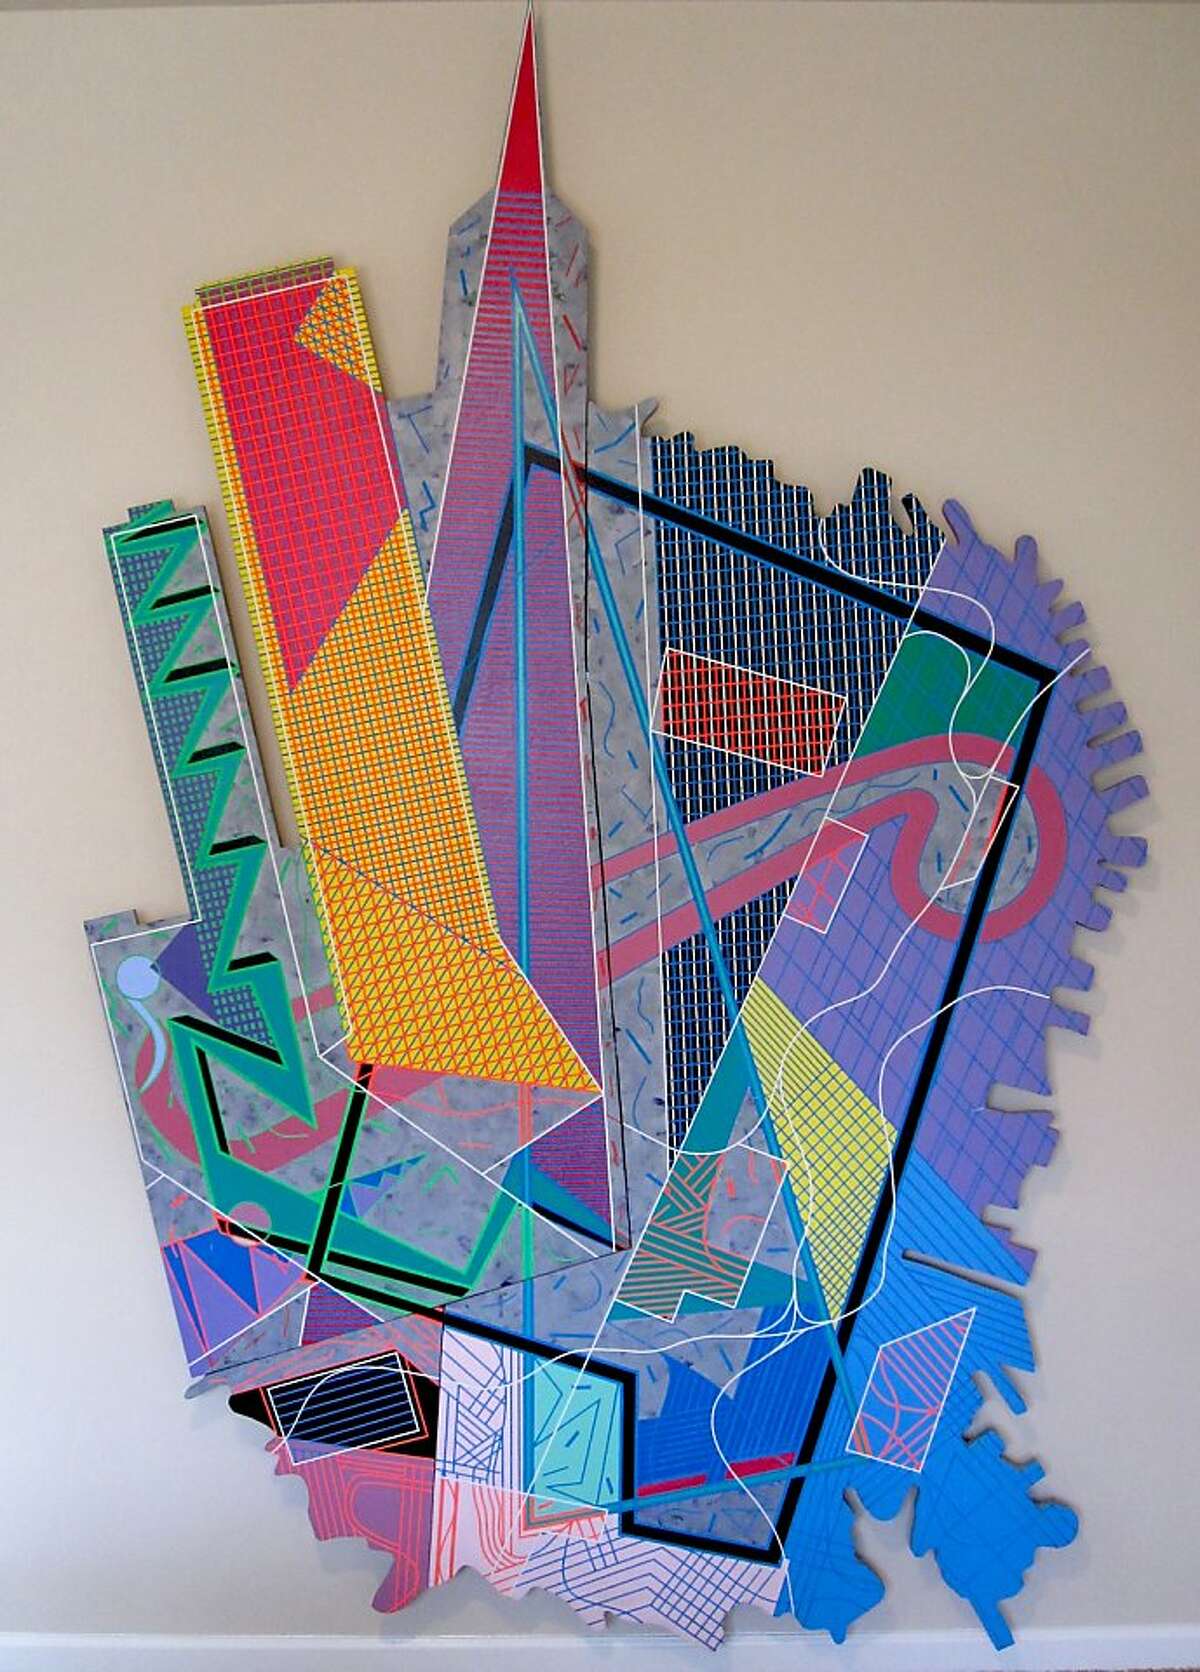 This pop-art painting of San Francisco from 1988 by Gregory Gioiosa is titled "Asterope."